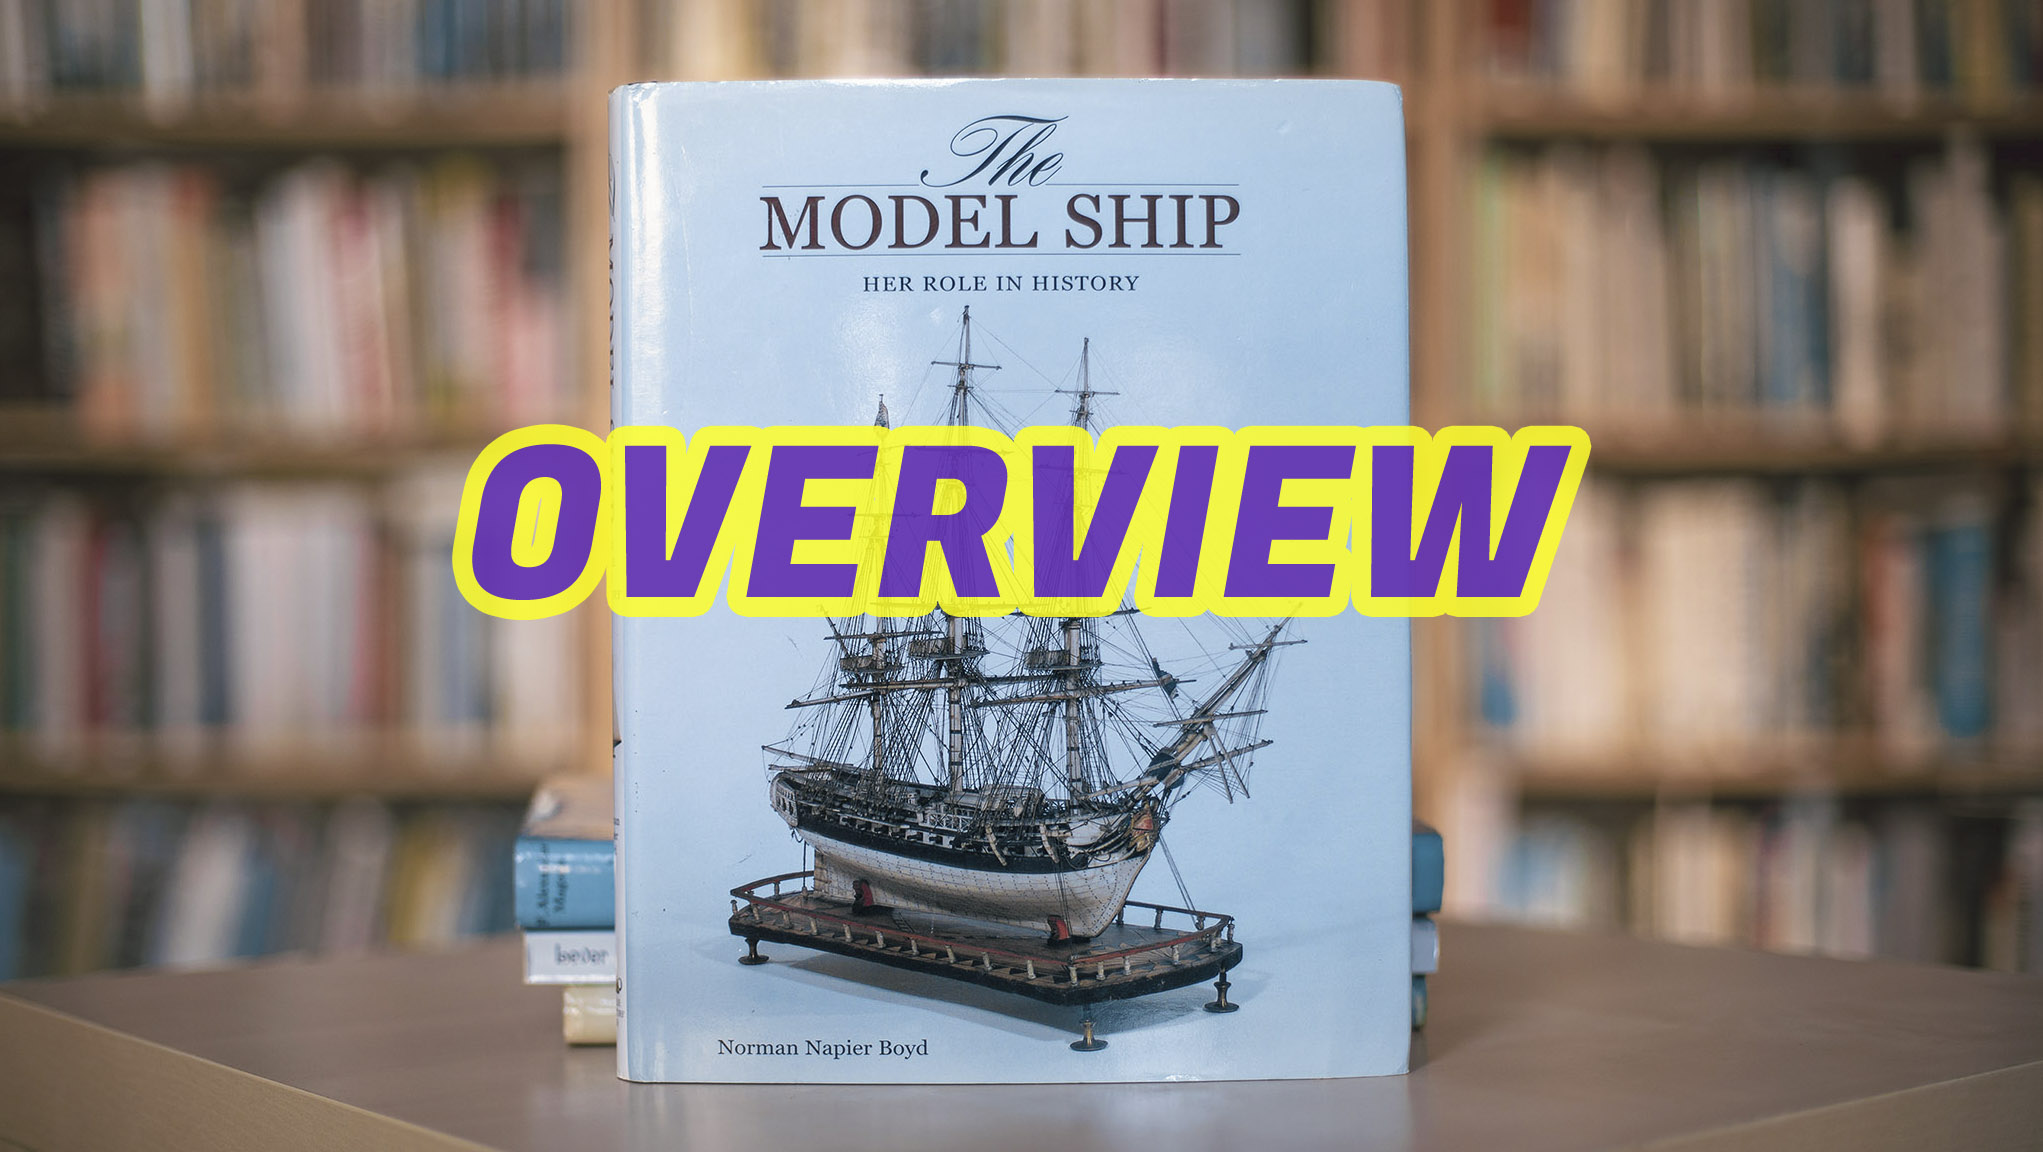 _080-OVERVIEW-The MODEL SHIP copy.jpg